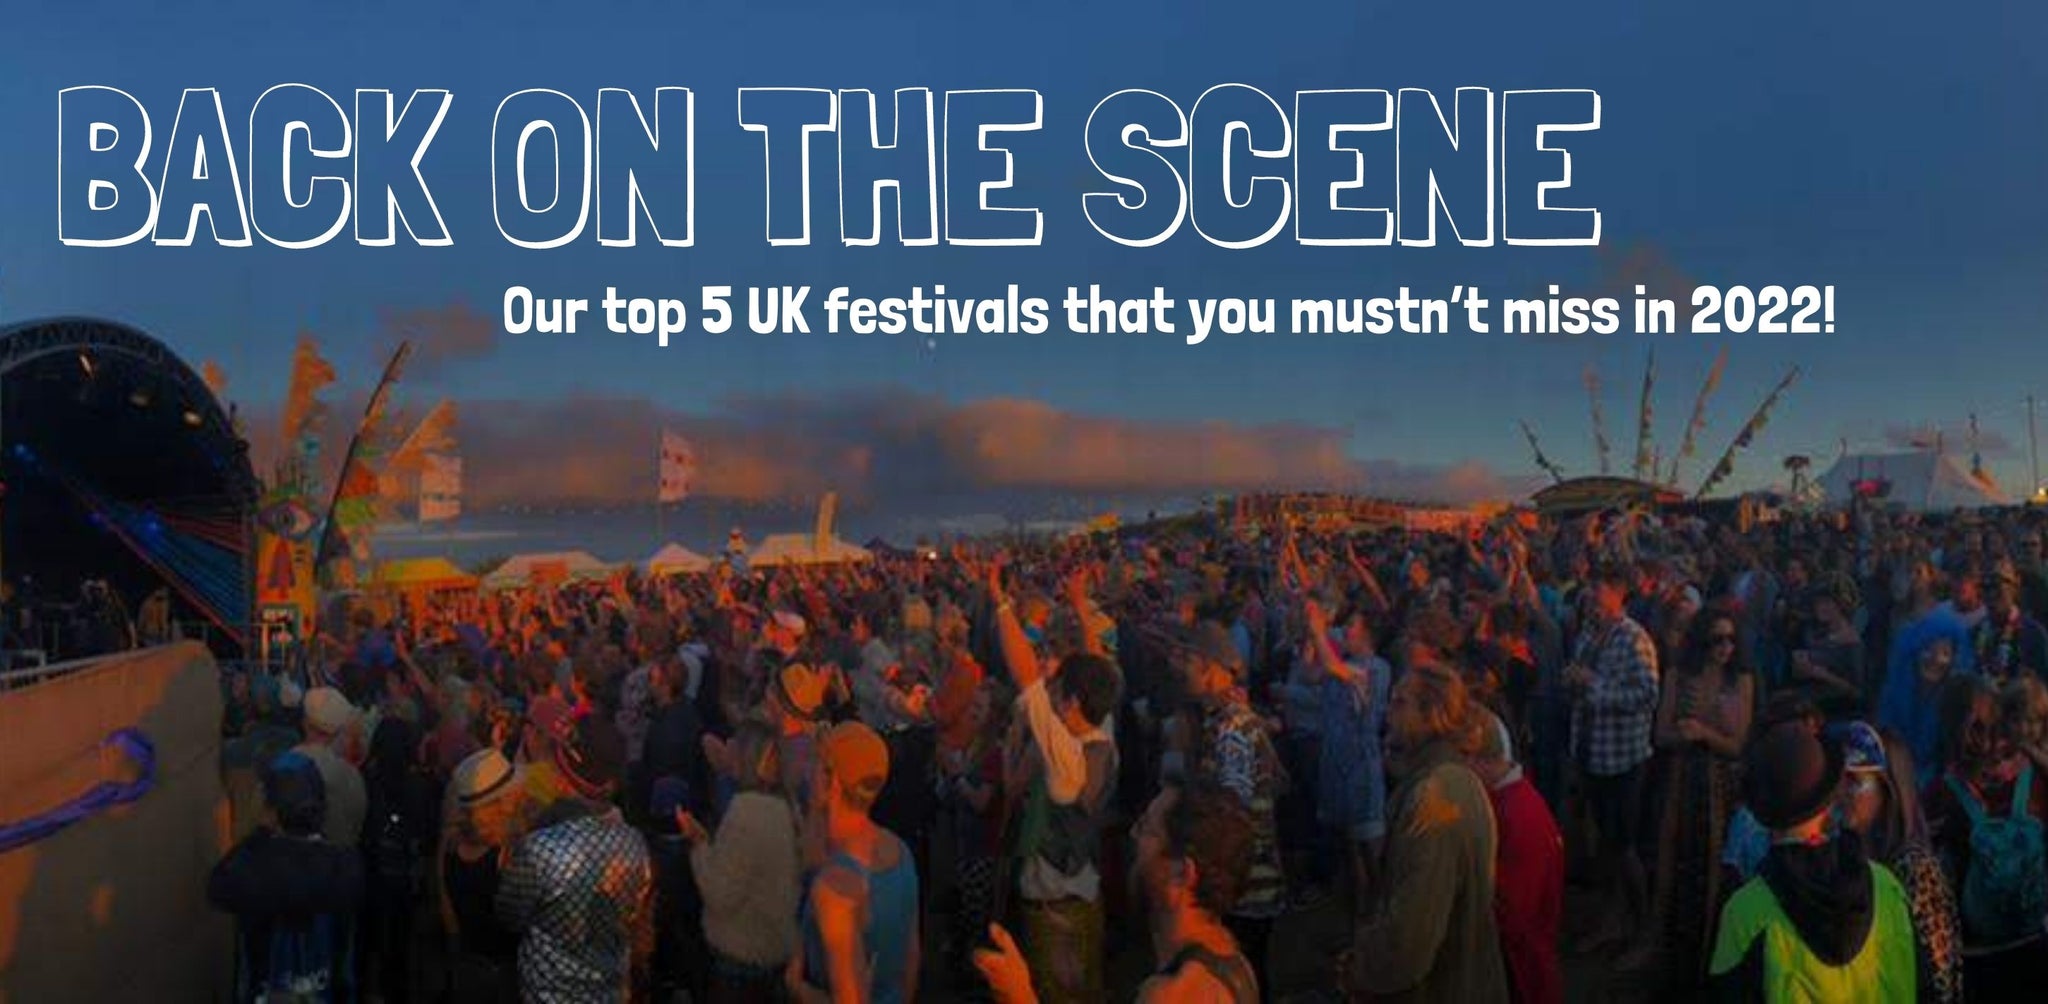 The Top 5 UK Festivals That You Mustn’t Miss in 2022